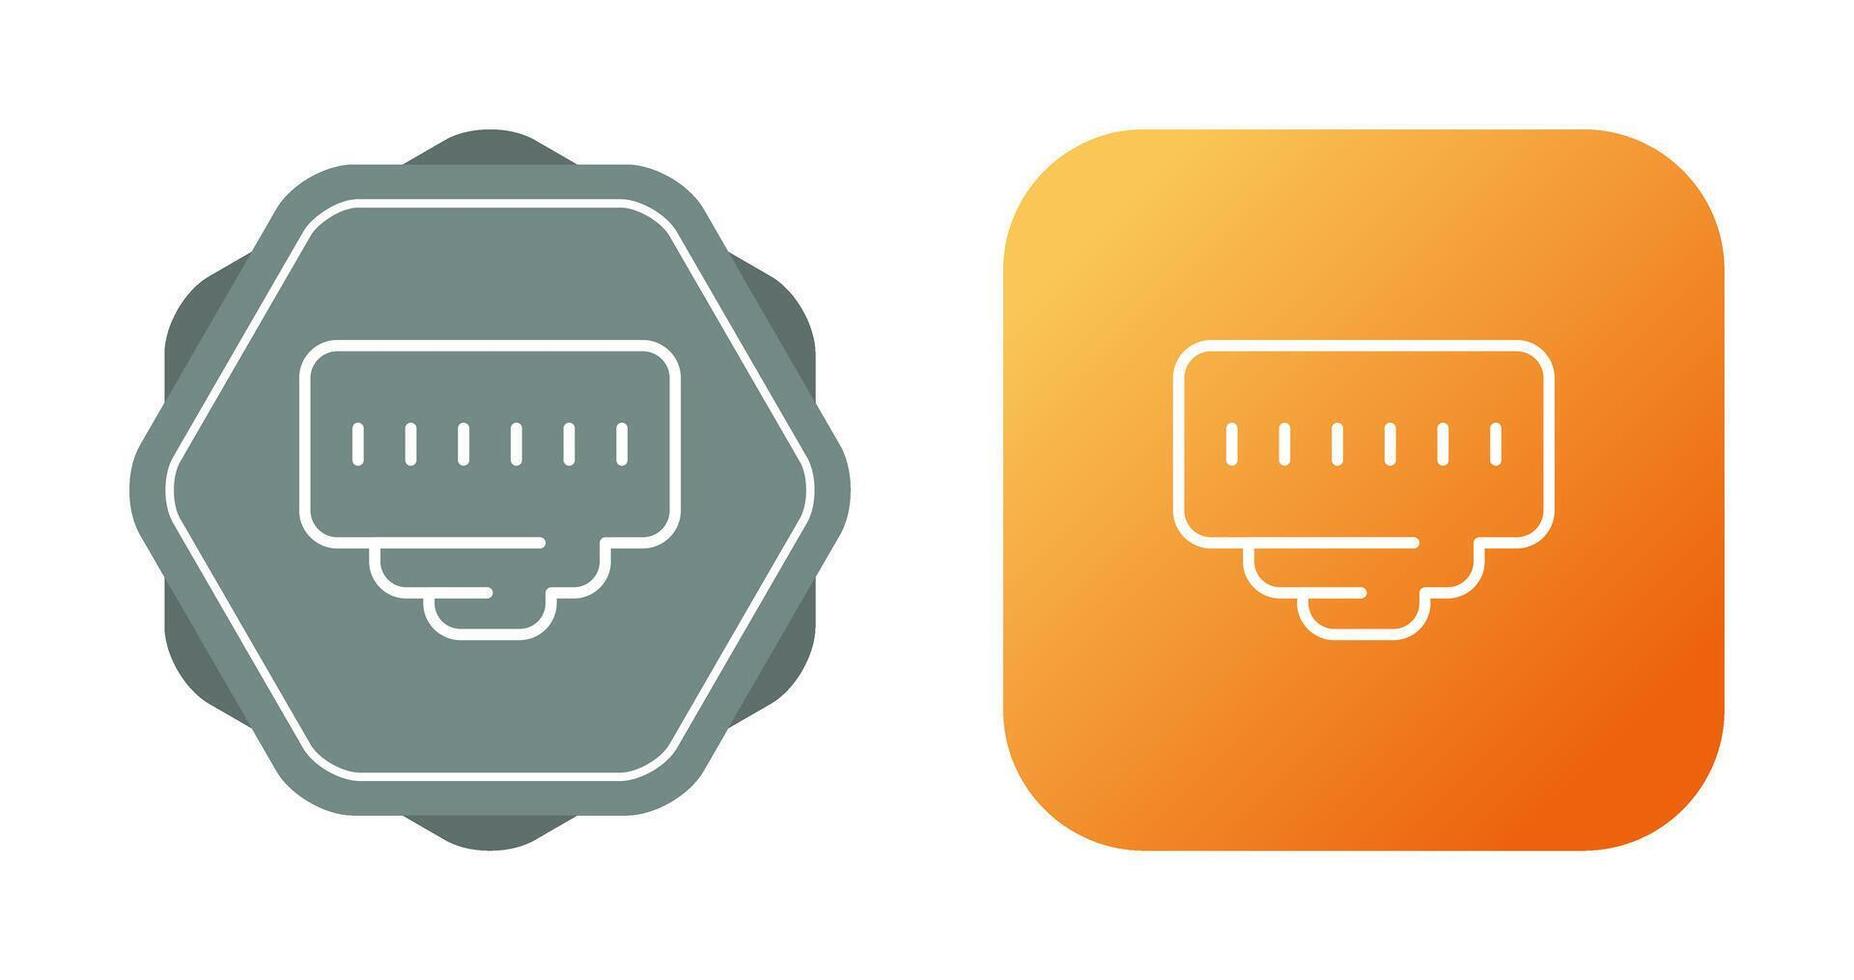 Ethernet Port Vector Icon